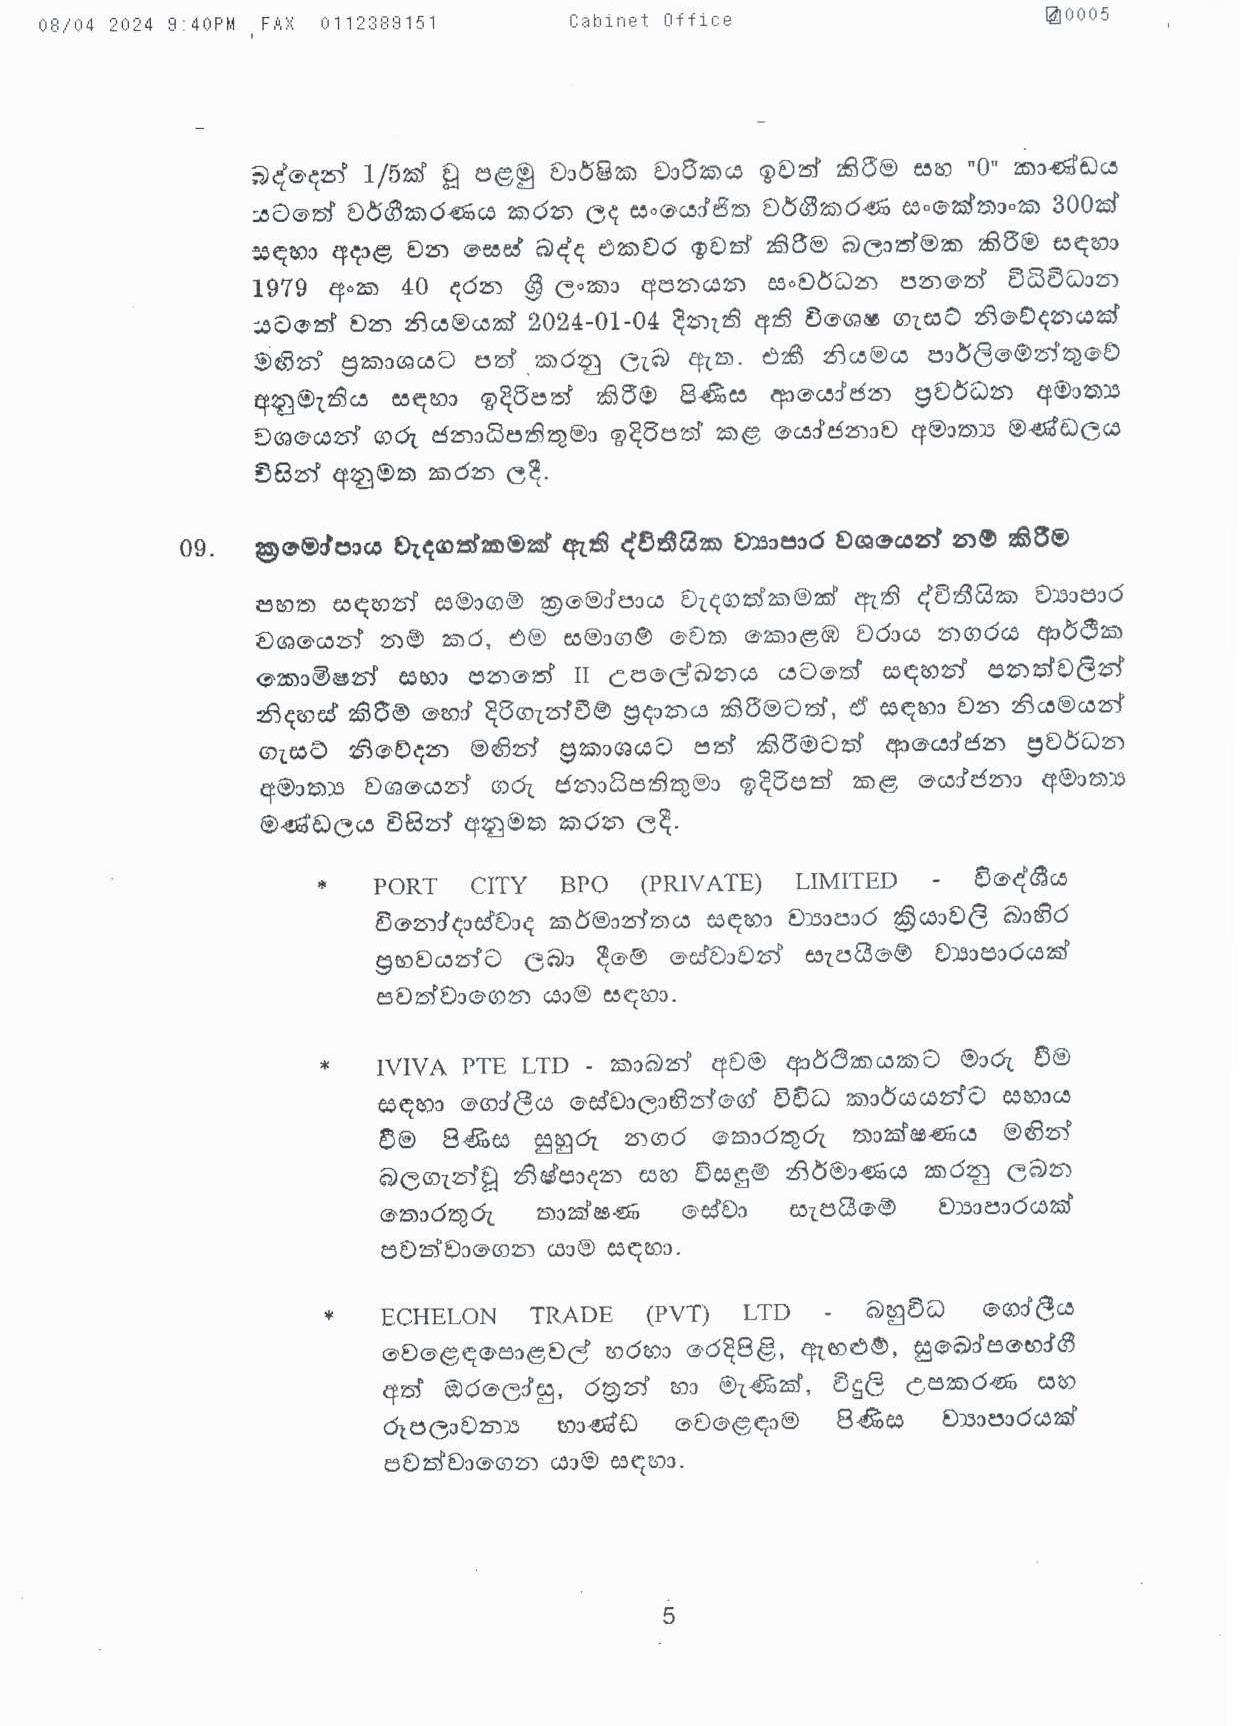 Cabinet Decision on 08.04.2024 page 005